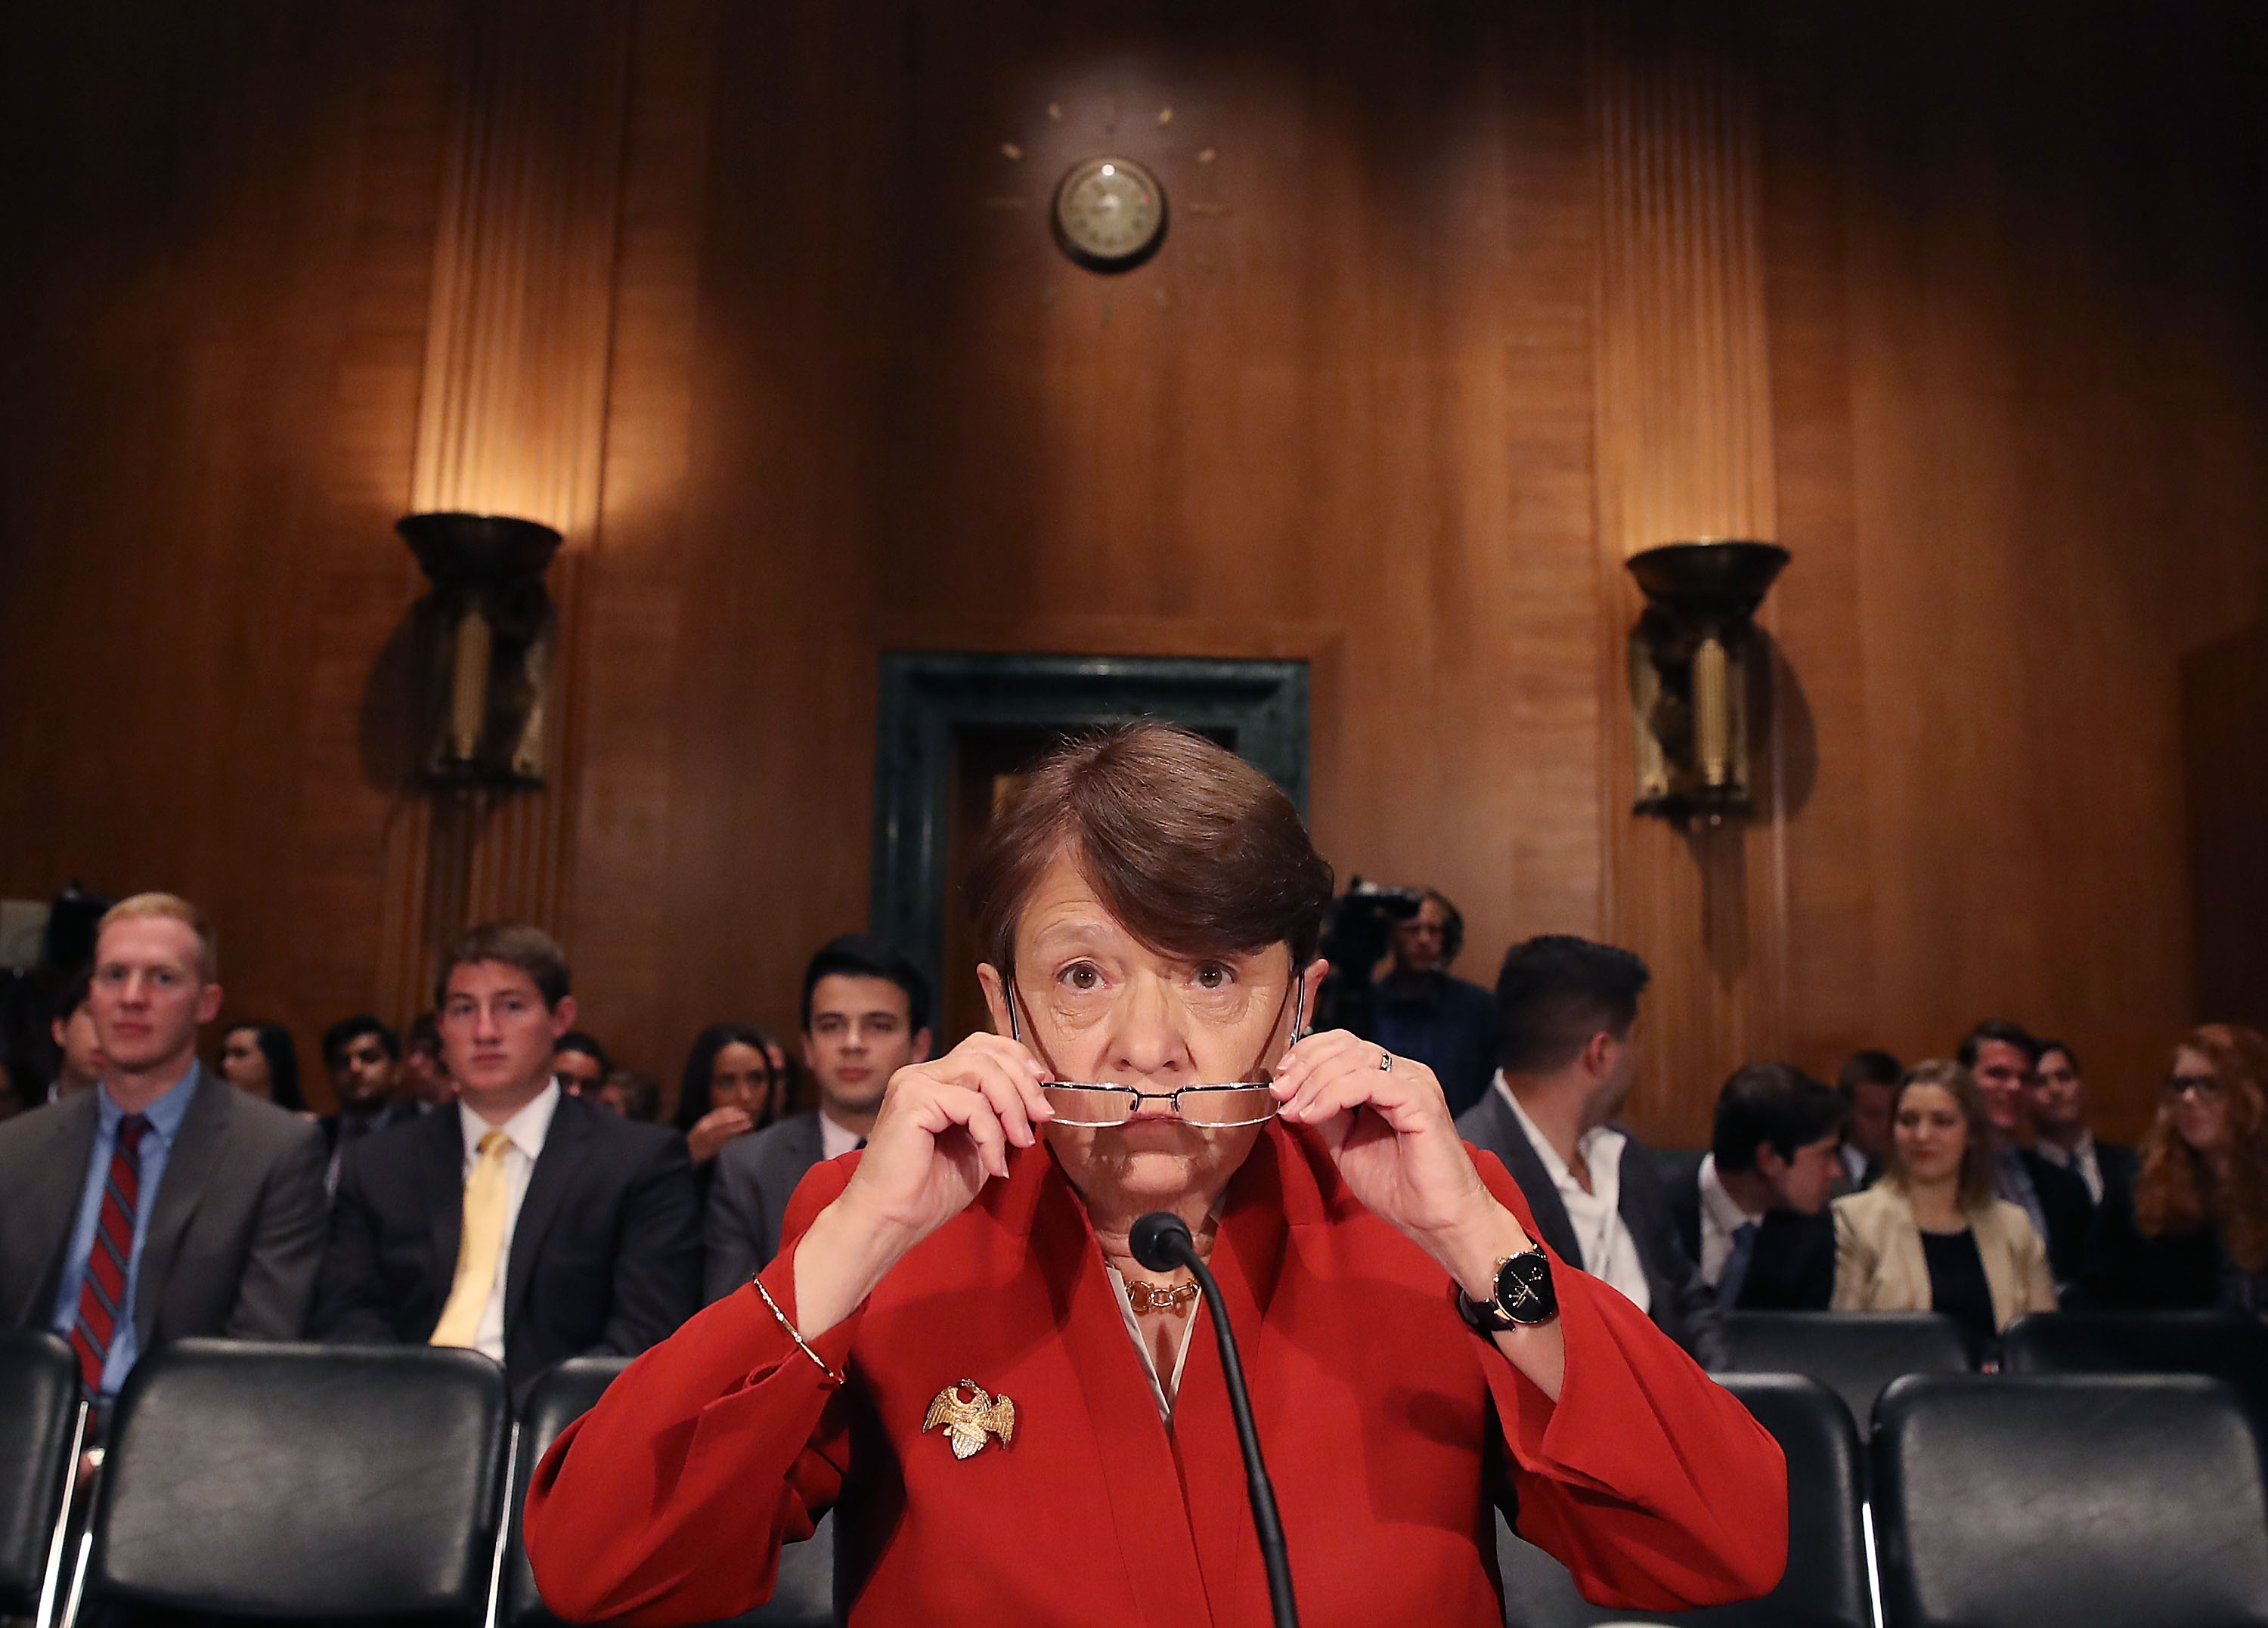 SEC Chairman Mary Jo White appears before the Senate Banking, Housing and Urban Affairs Committee on Capitol Hill June 14, 2016 in Washington, DC. The committee heard testimony regarding oversight of the US Securities and Exchange Commission. (Photo by Mark Wilson/Getty Images)